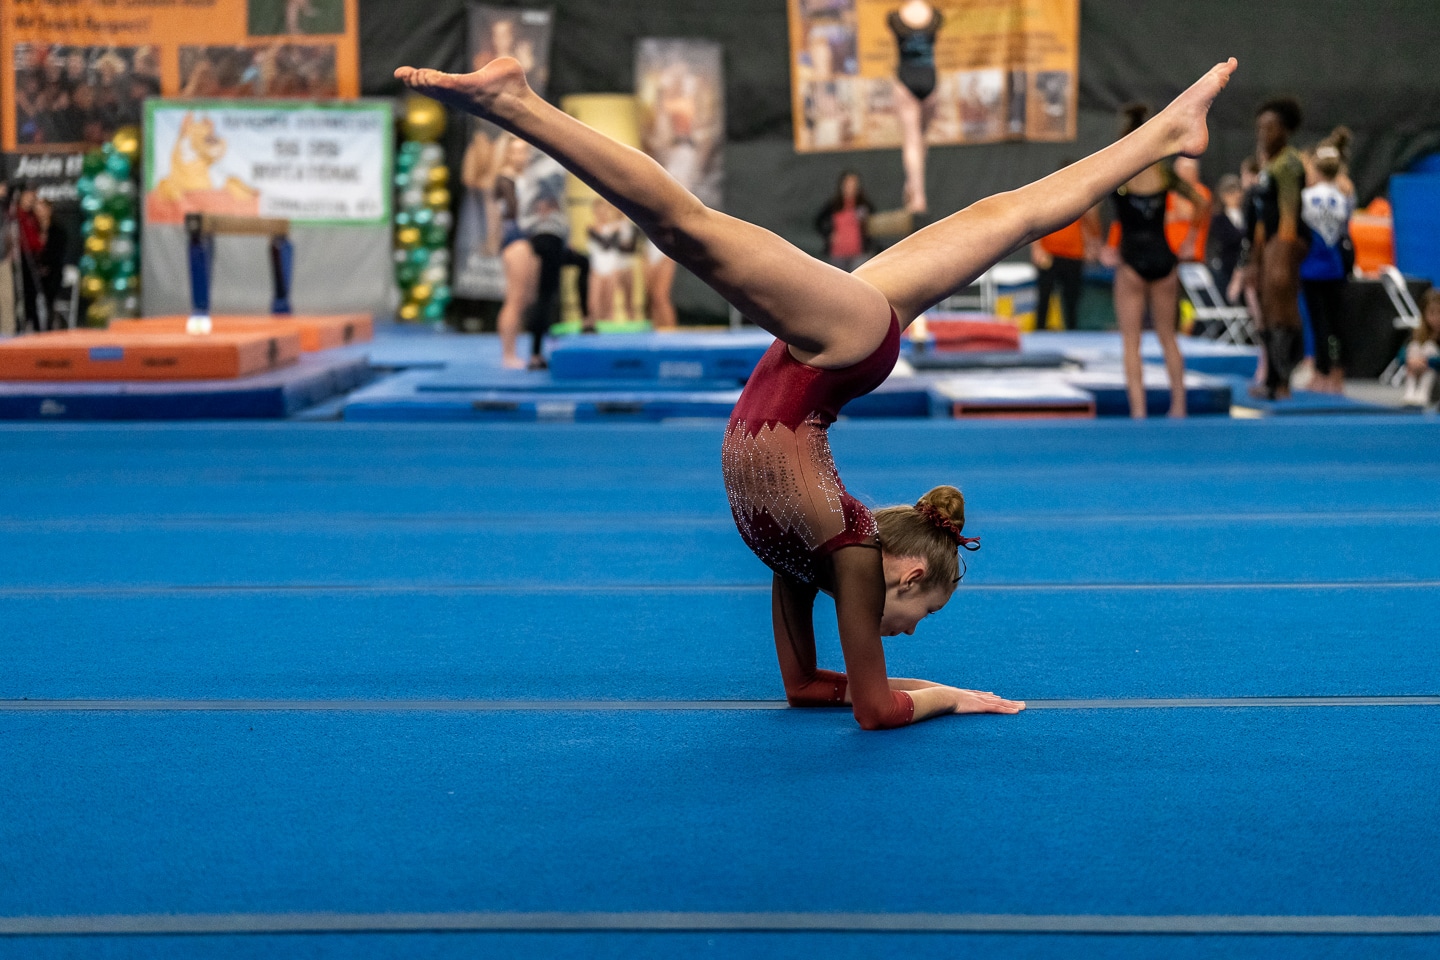 Young gymnast performing a handstand on the floor exercise mat at a gymnastics competition.